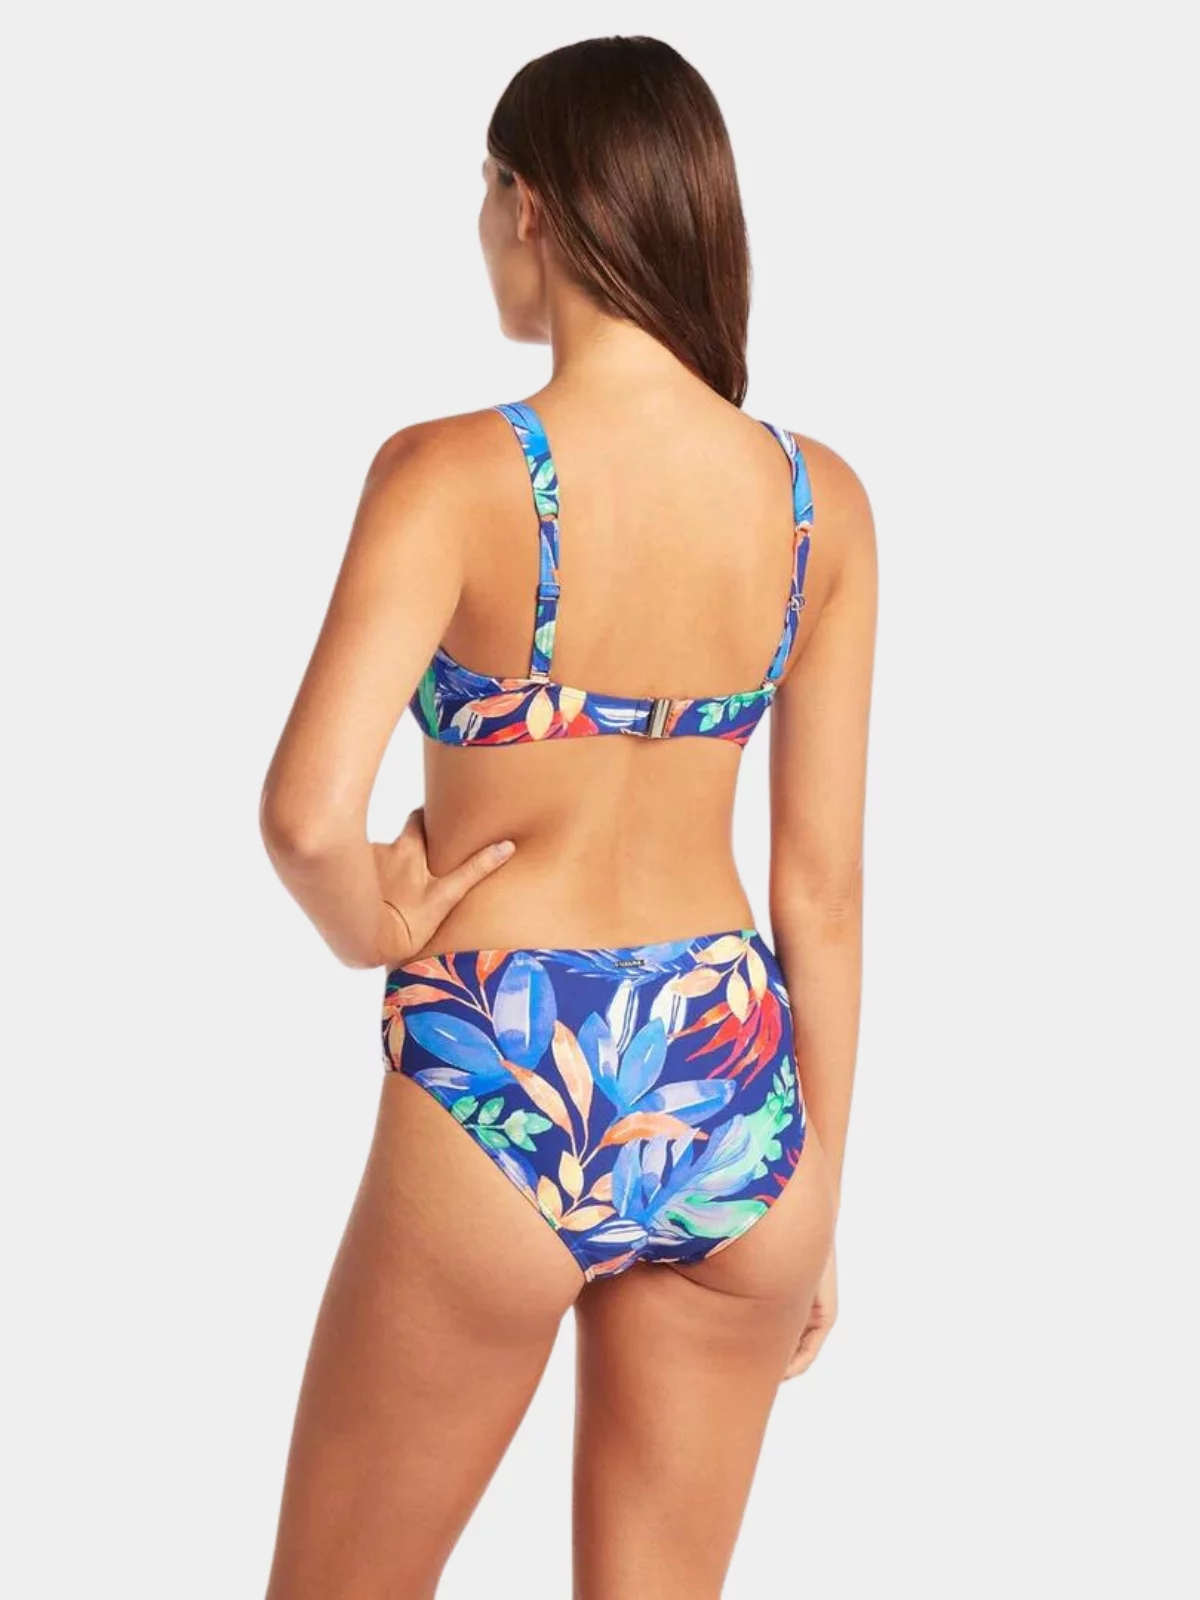 D Cup Swimsuits for Women